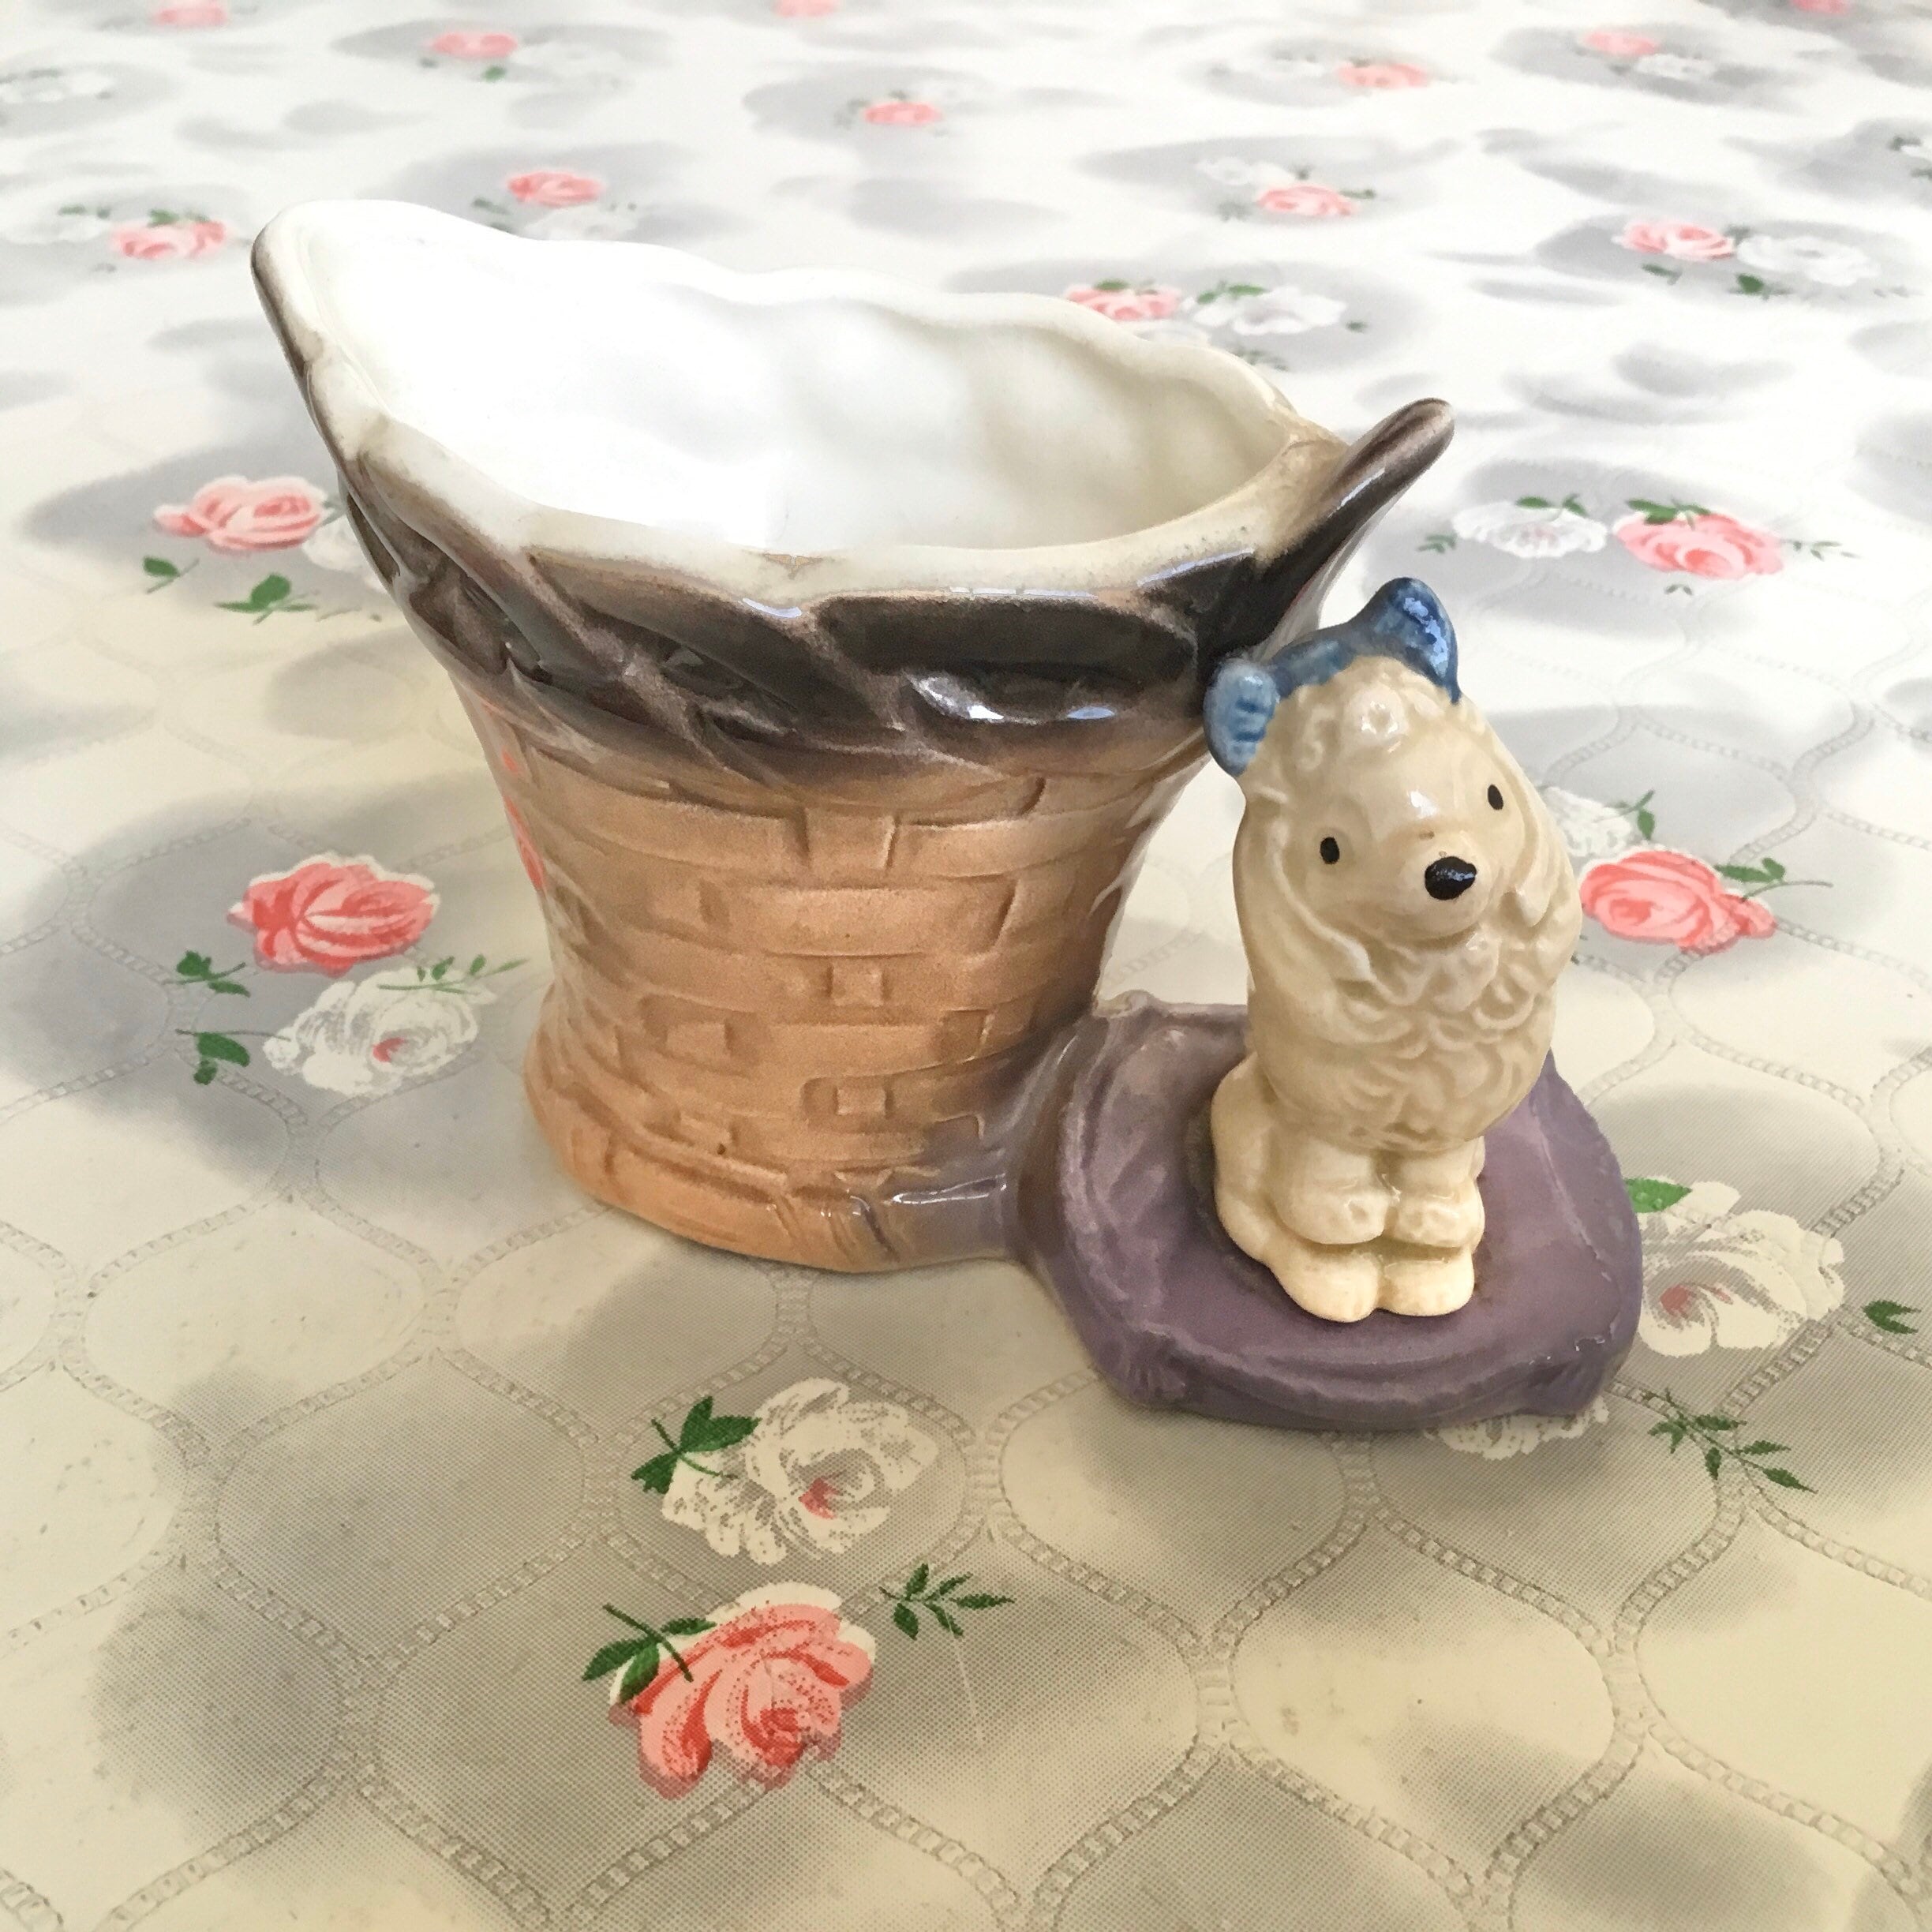 collectible vintage posy vase with dog, 1950s Hornsea pottery planter with wicker basket and French poodle